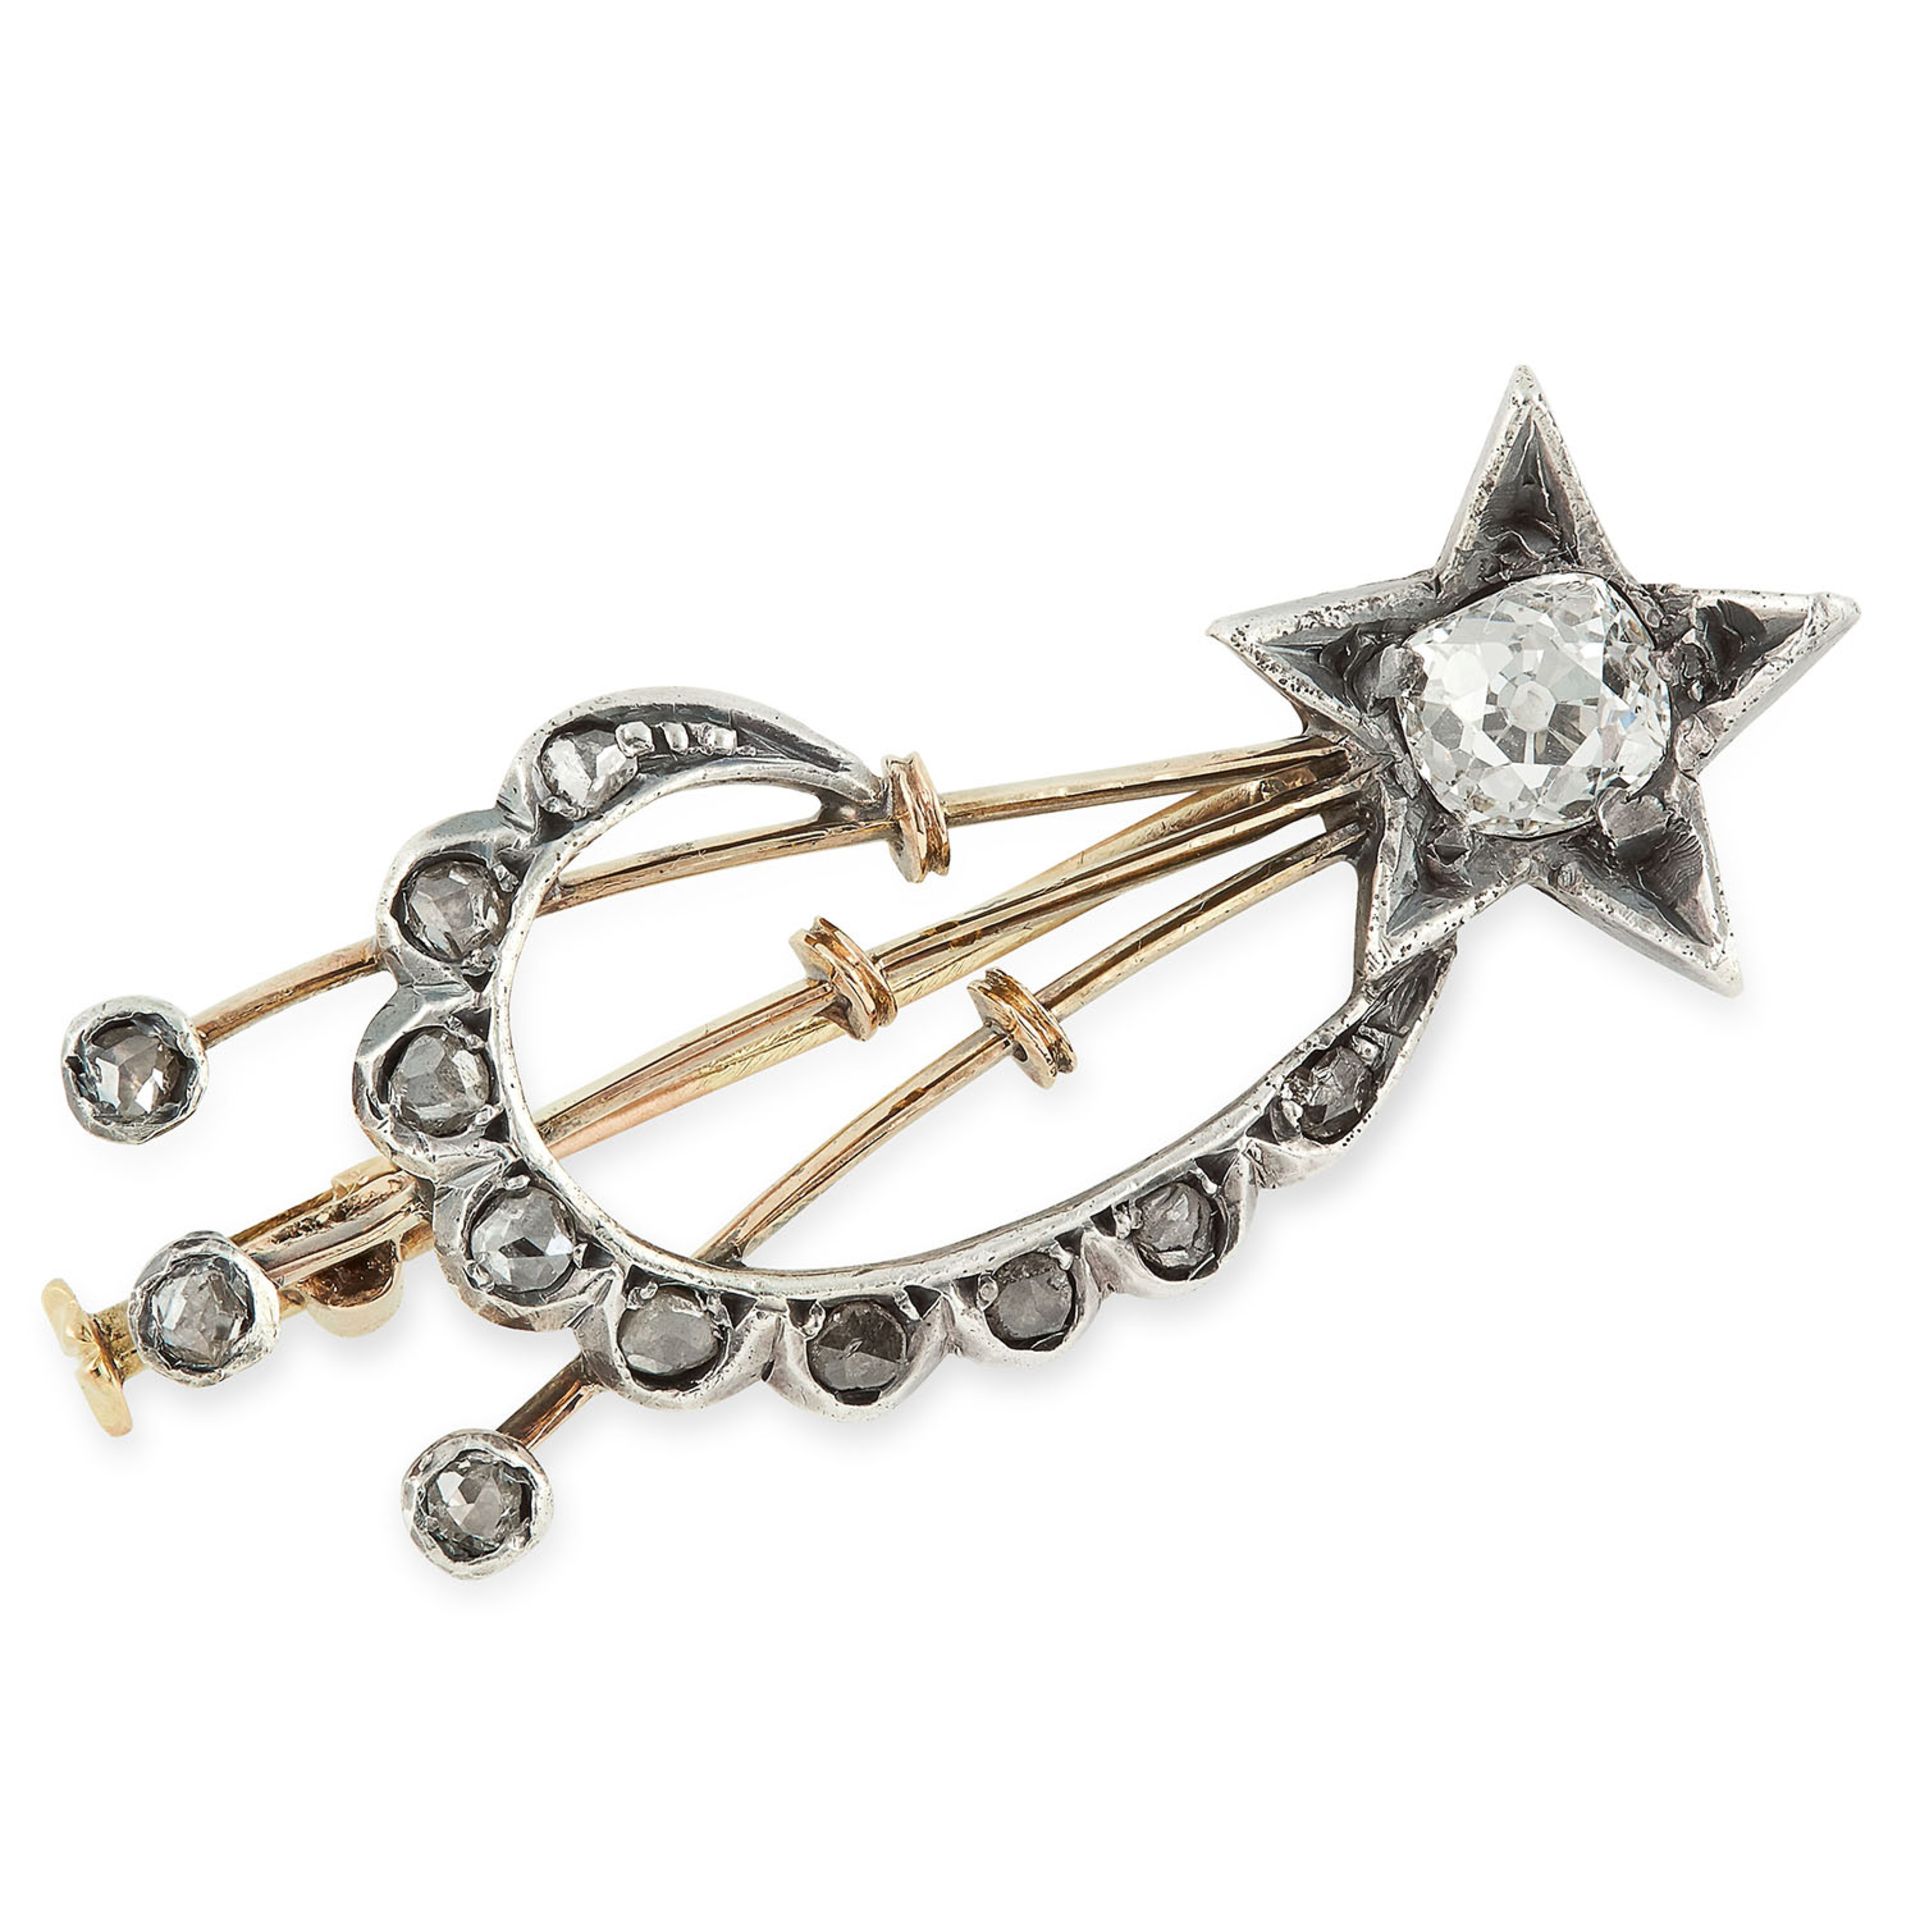 ANTIQUE SHOOTING STAR BROOCH set with a central old cut diamond and rose cut diamonds, 4cm, 4.9g.